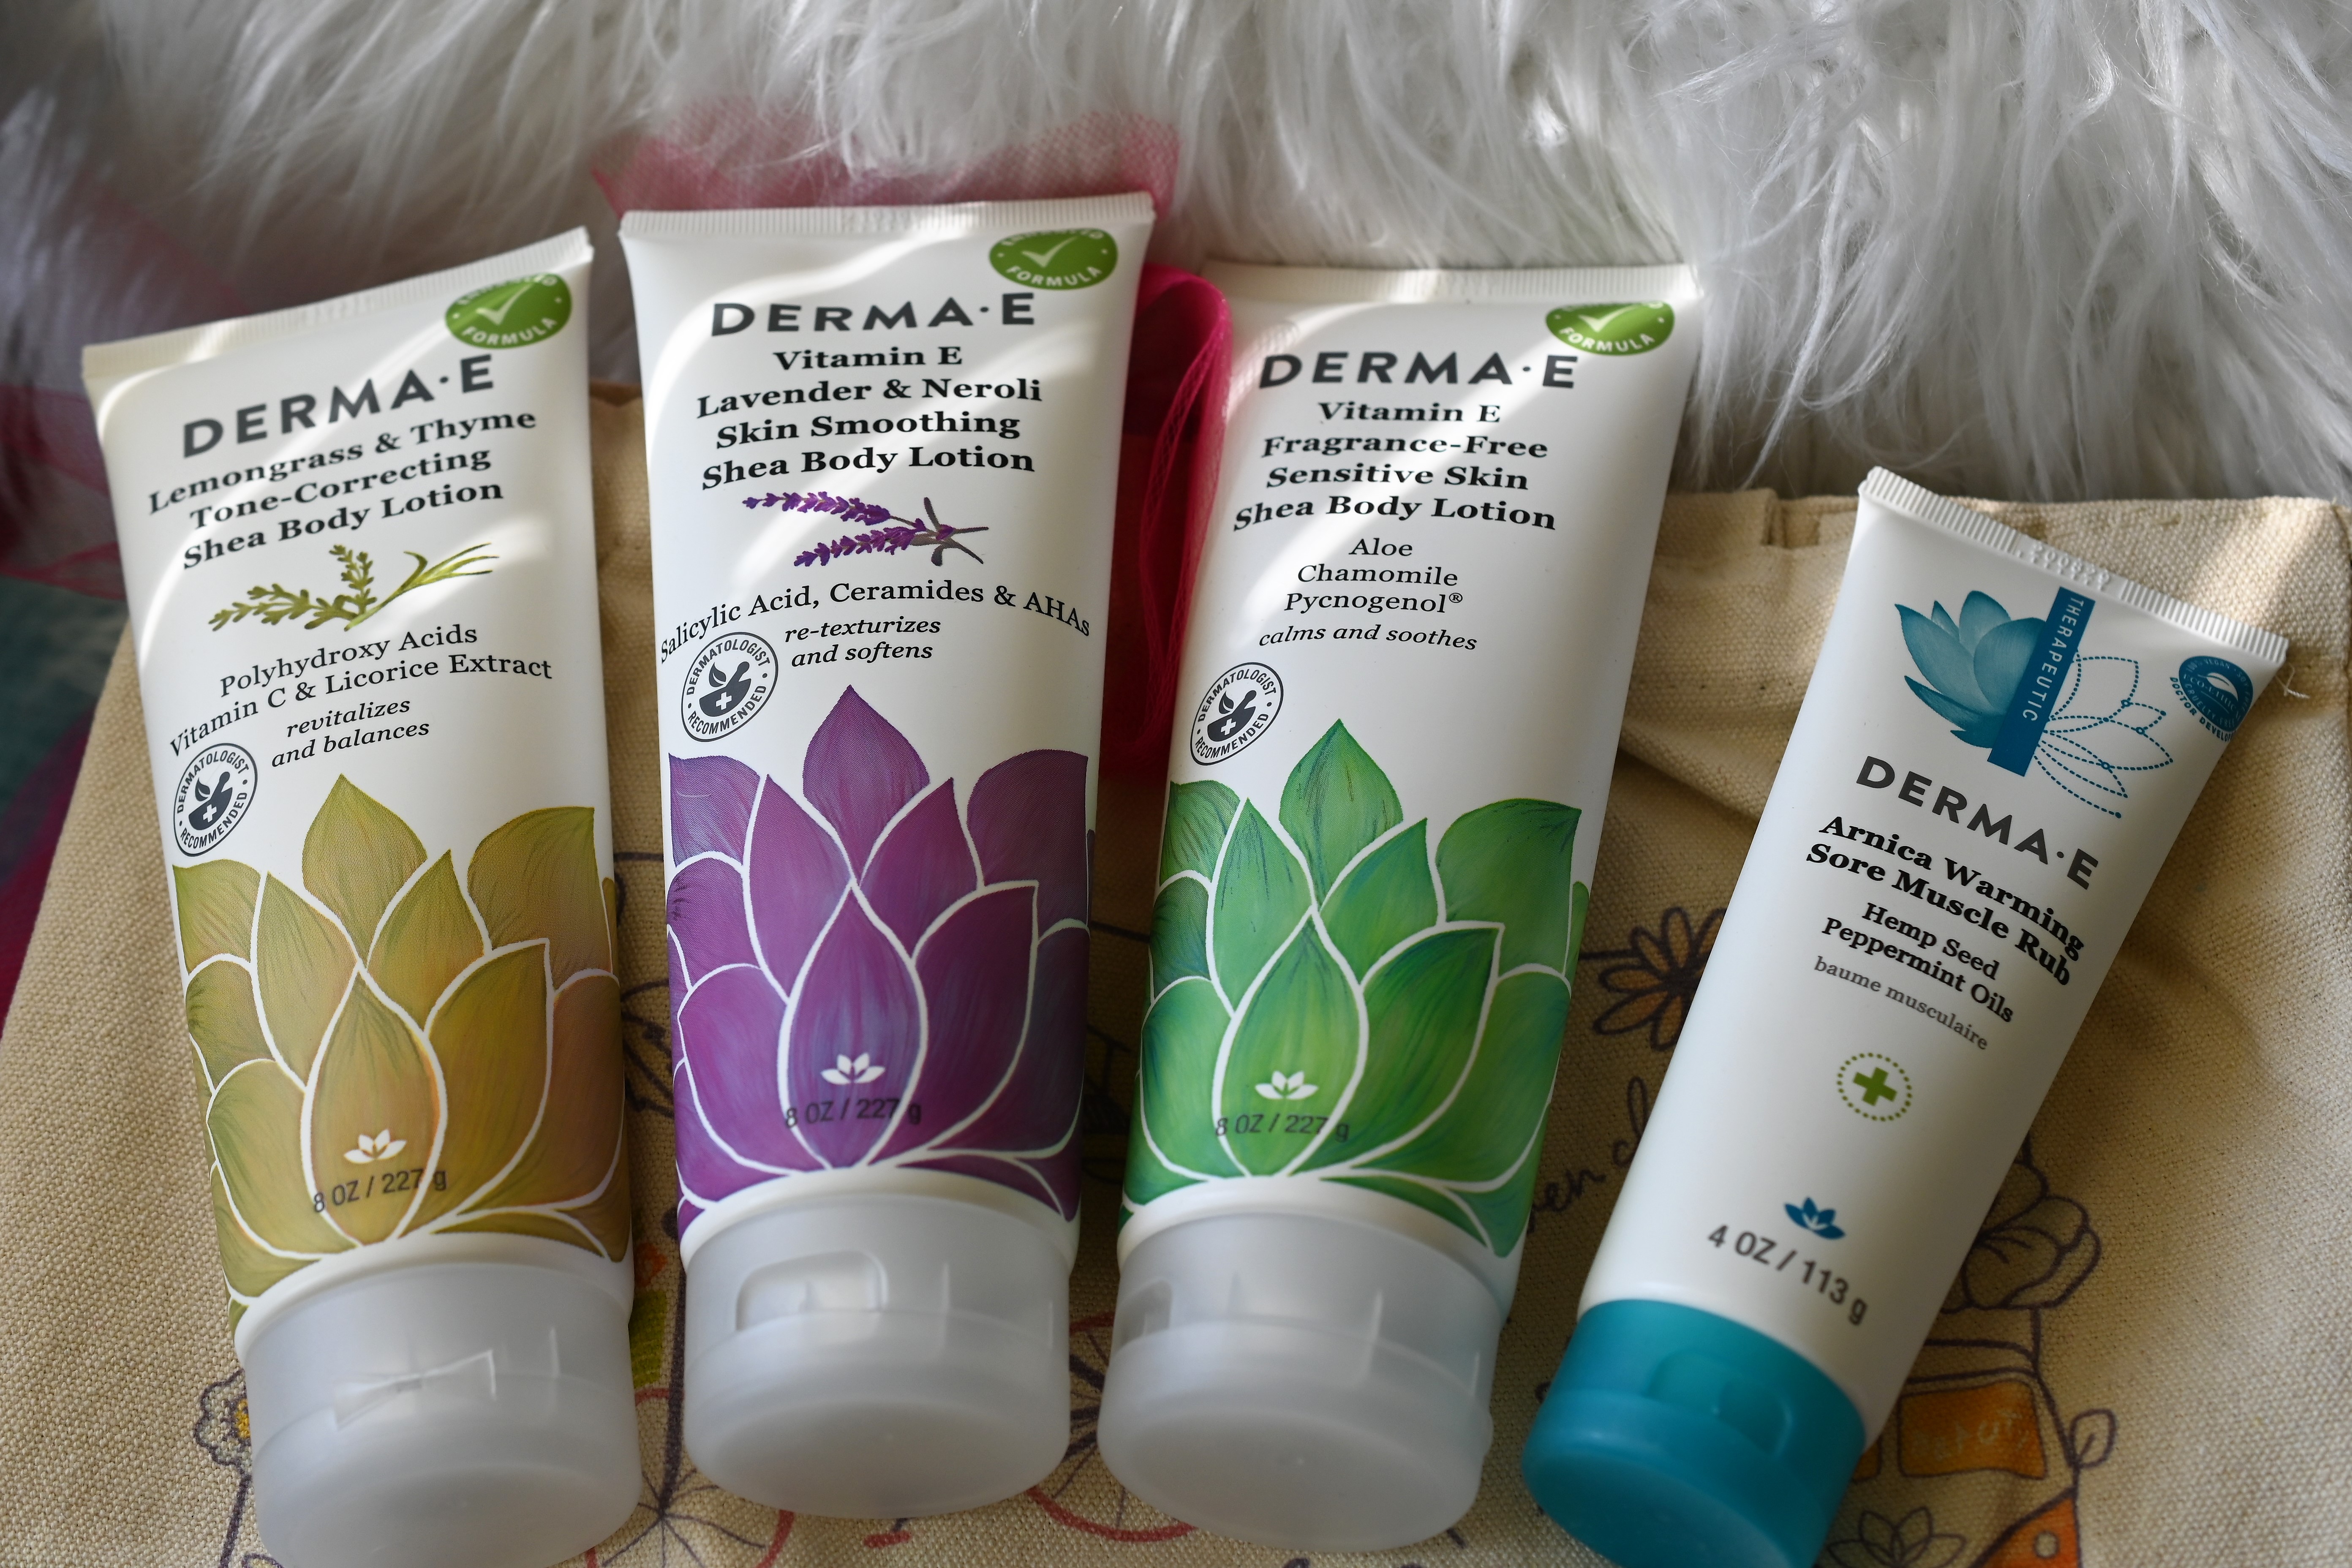 Check Out the Benefits of these Lotions: DERMA-E's Newly Enhanced Body Care Lotion